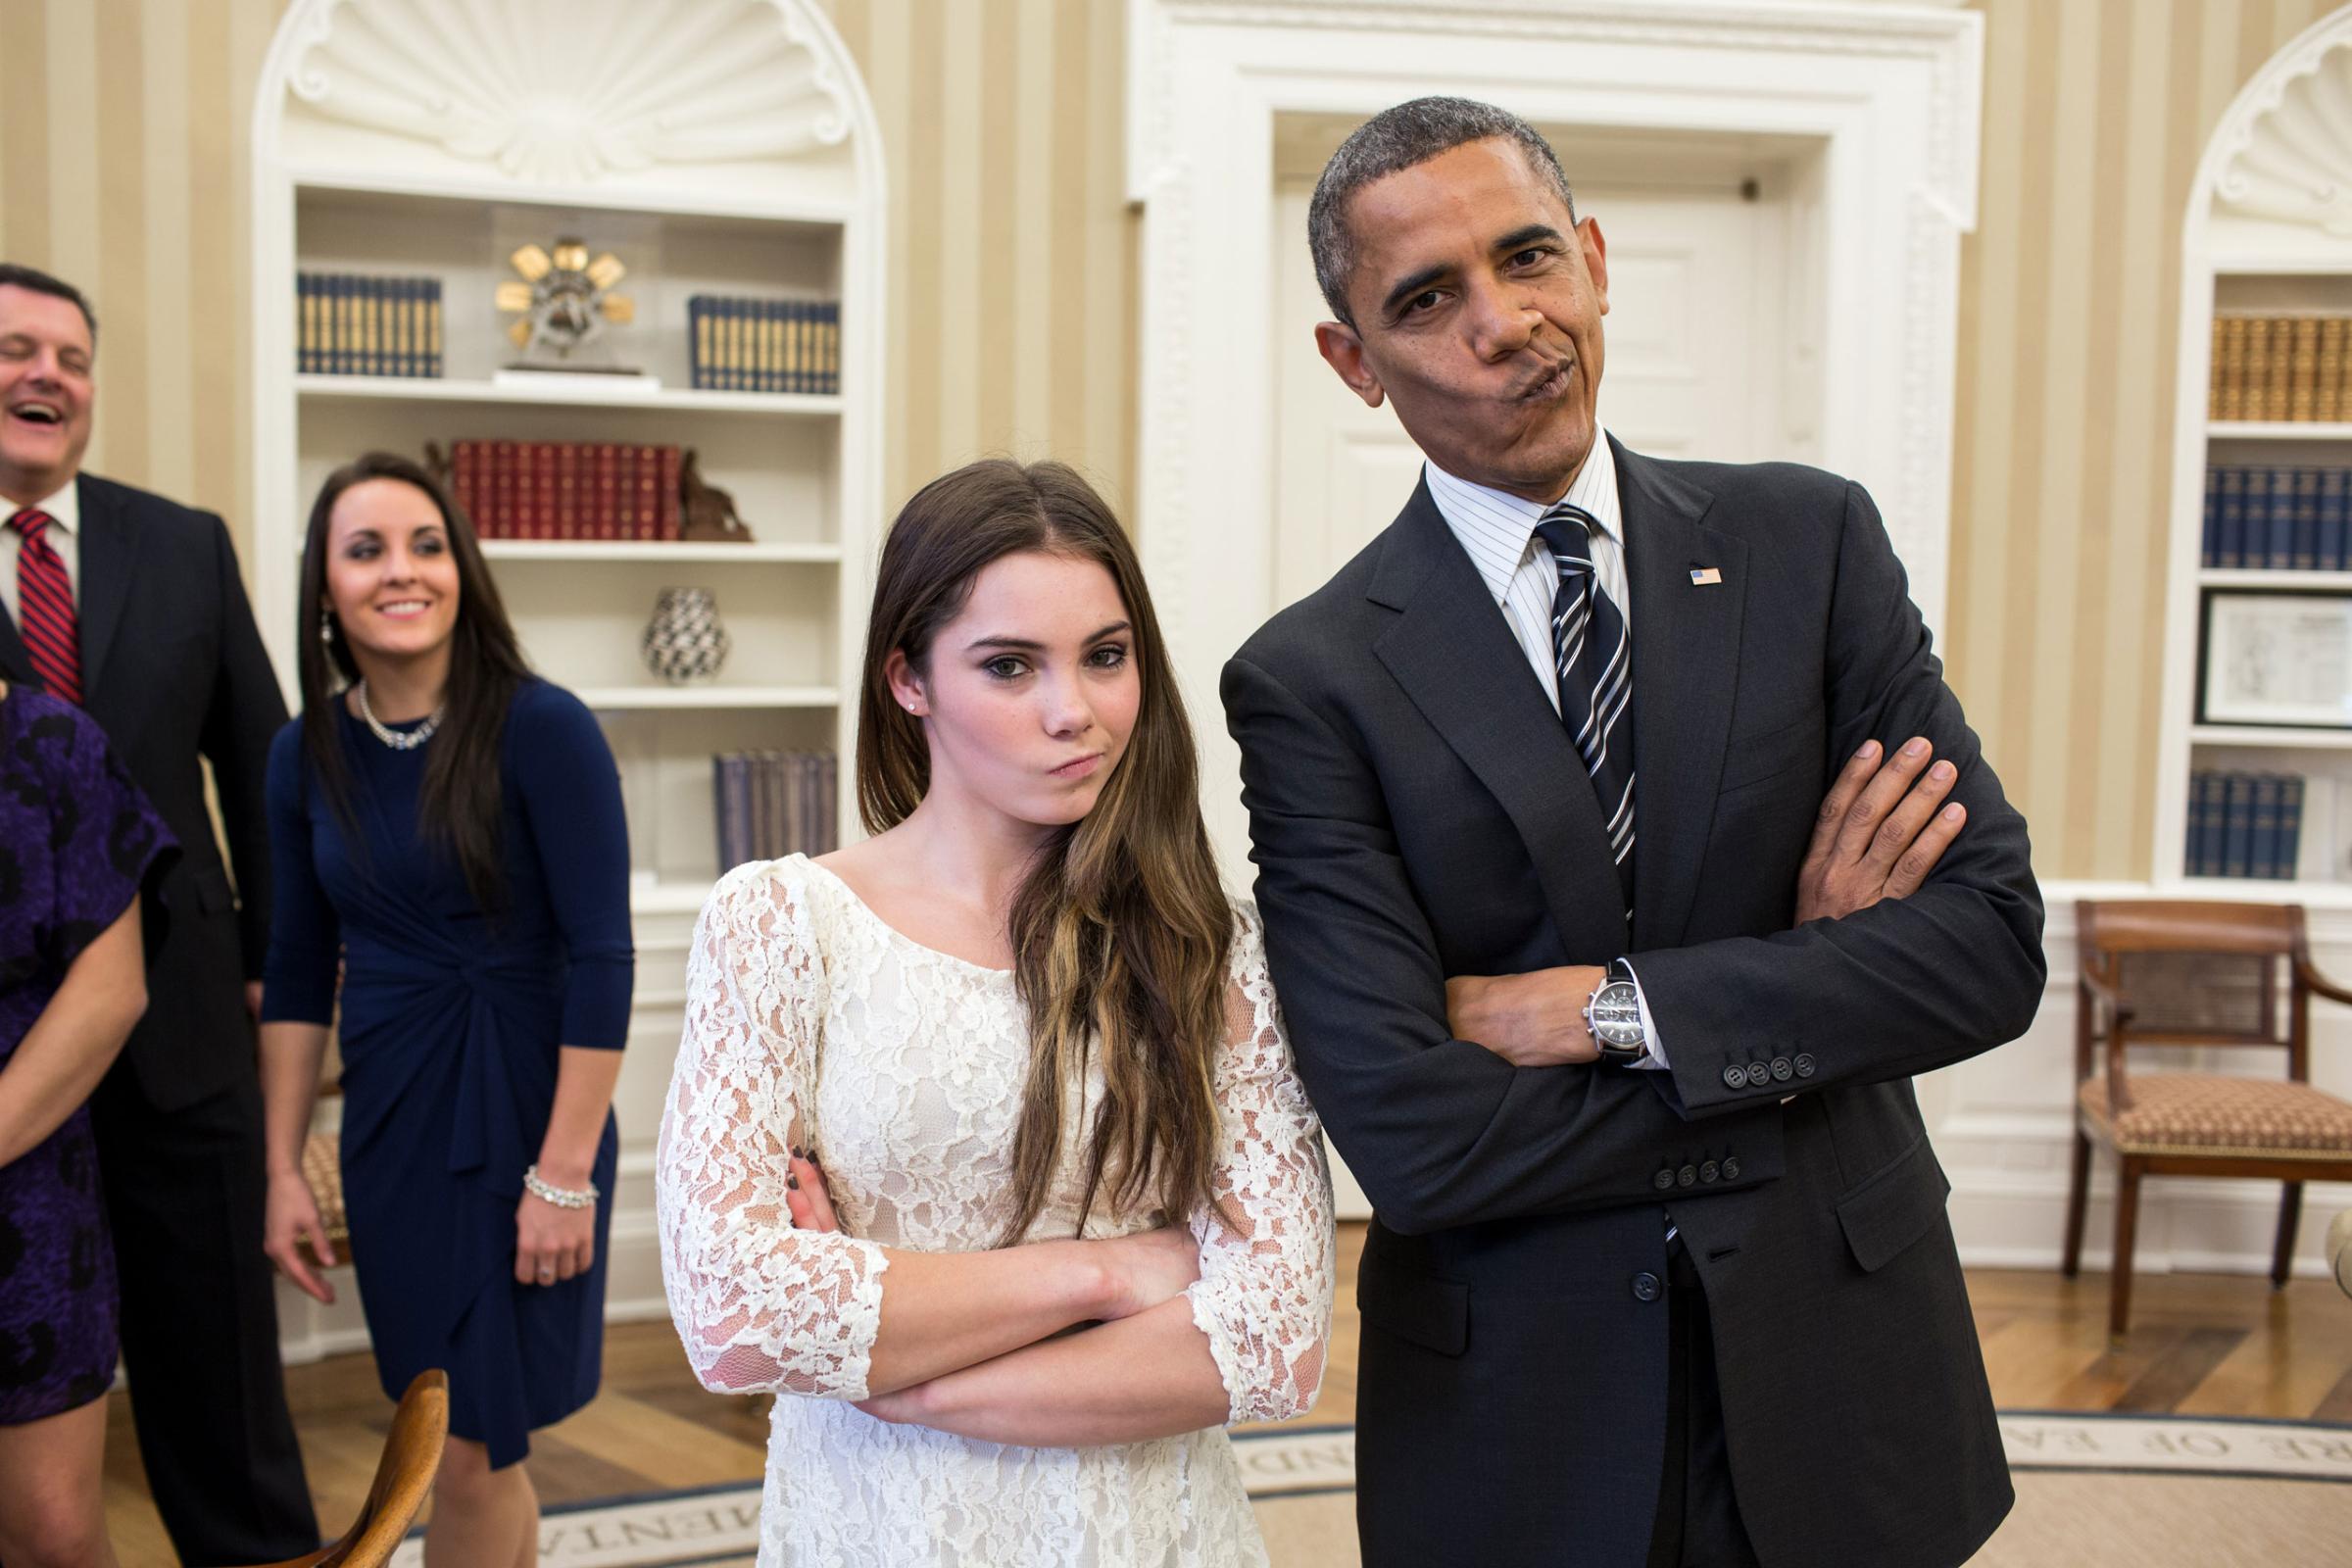 "The President had just met with the U.S. Olympics gymnastics team, who because of a previous commitment had missed the ceremony earlier in the year with the entire U.S. Olympic team. The President suggested to McKayla Maroney that they recreate her 'not impressed' photograph before they departed,"Nov. 15, 2012.